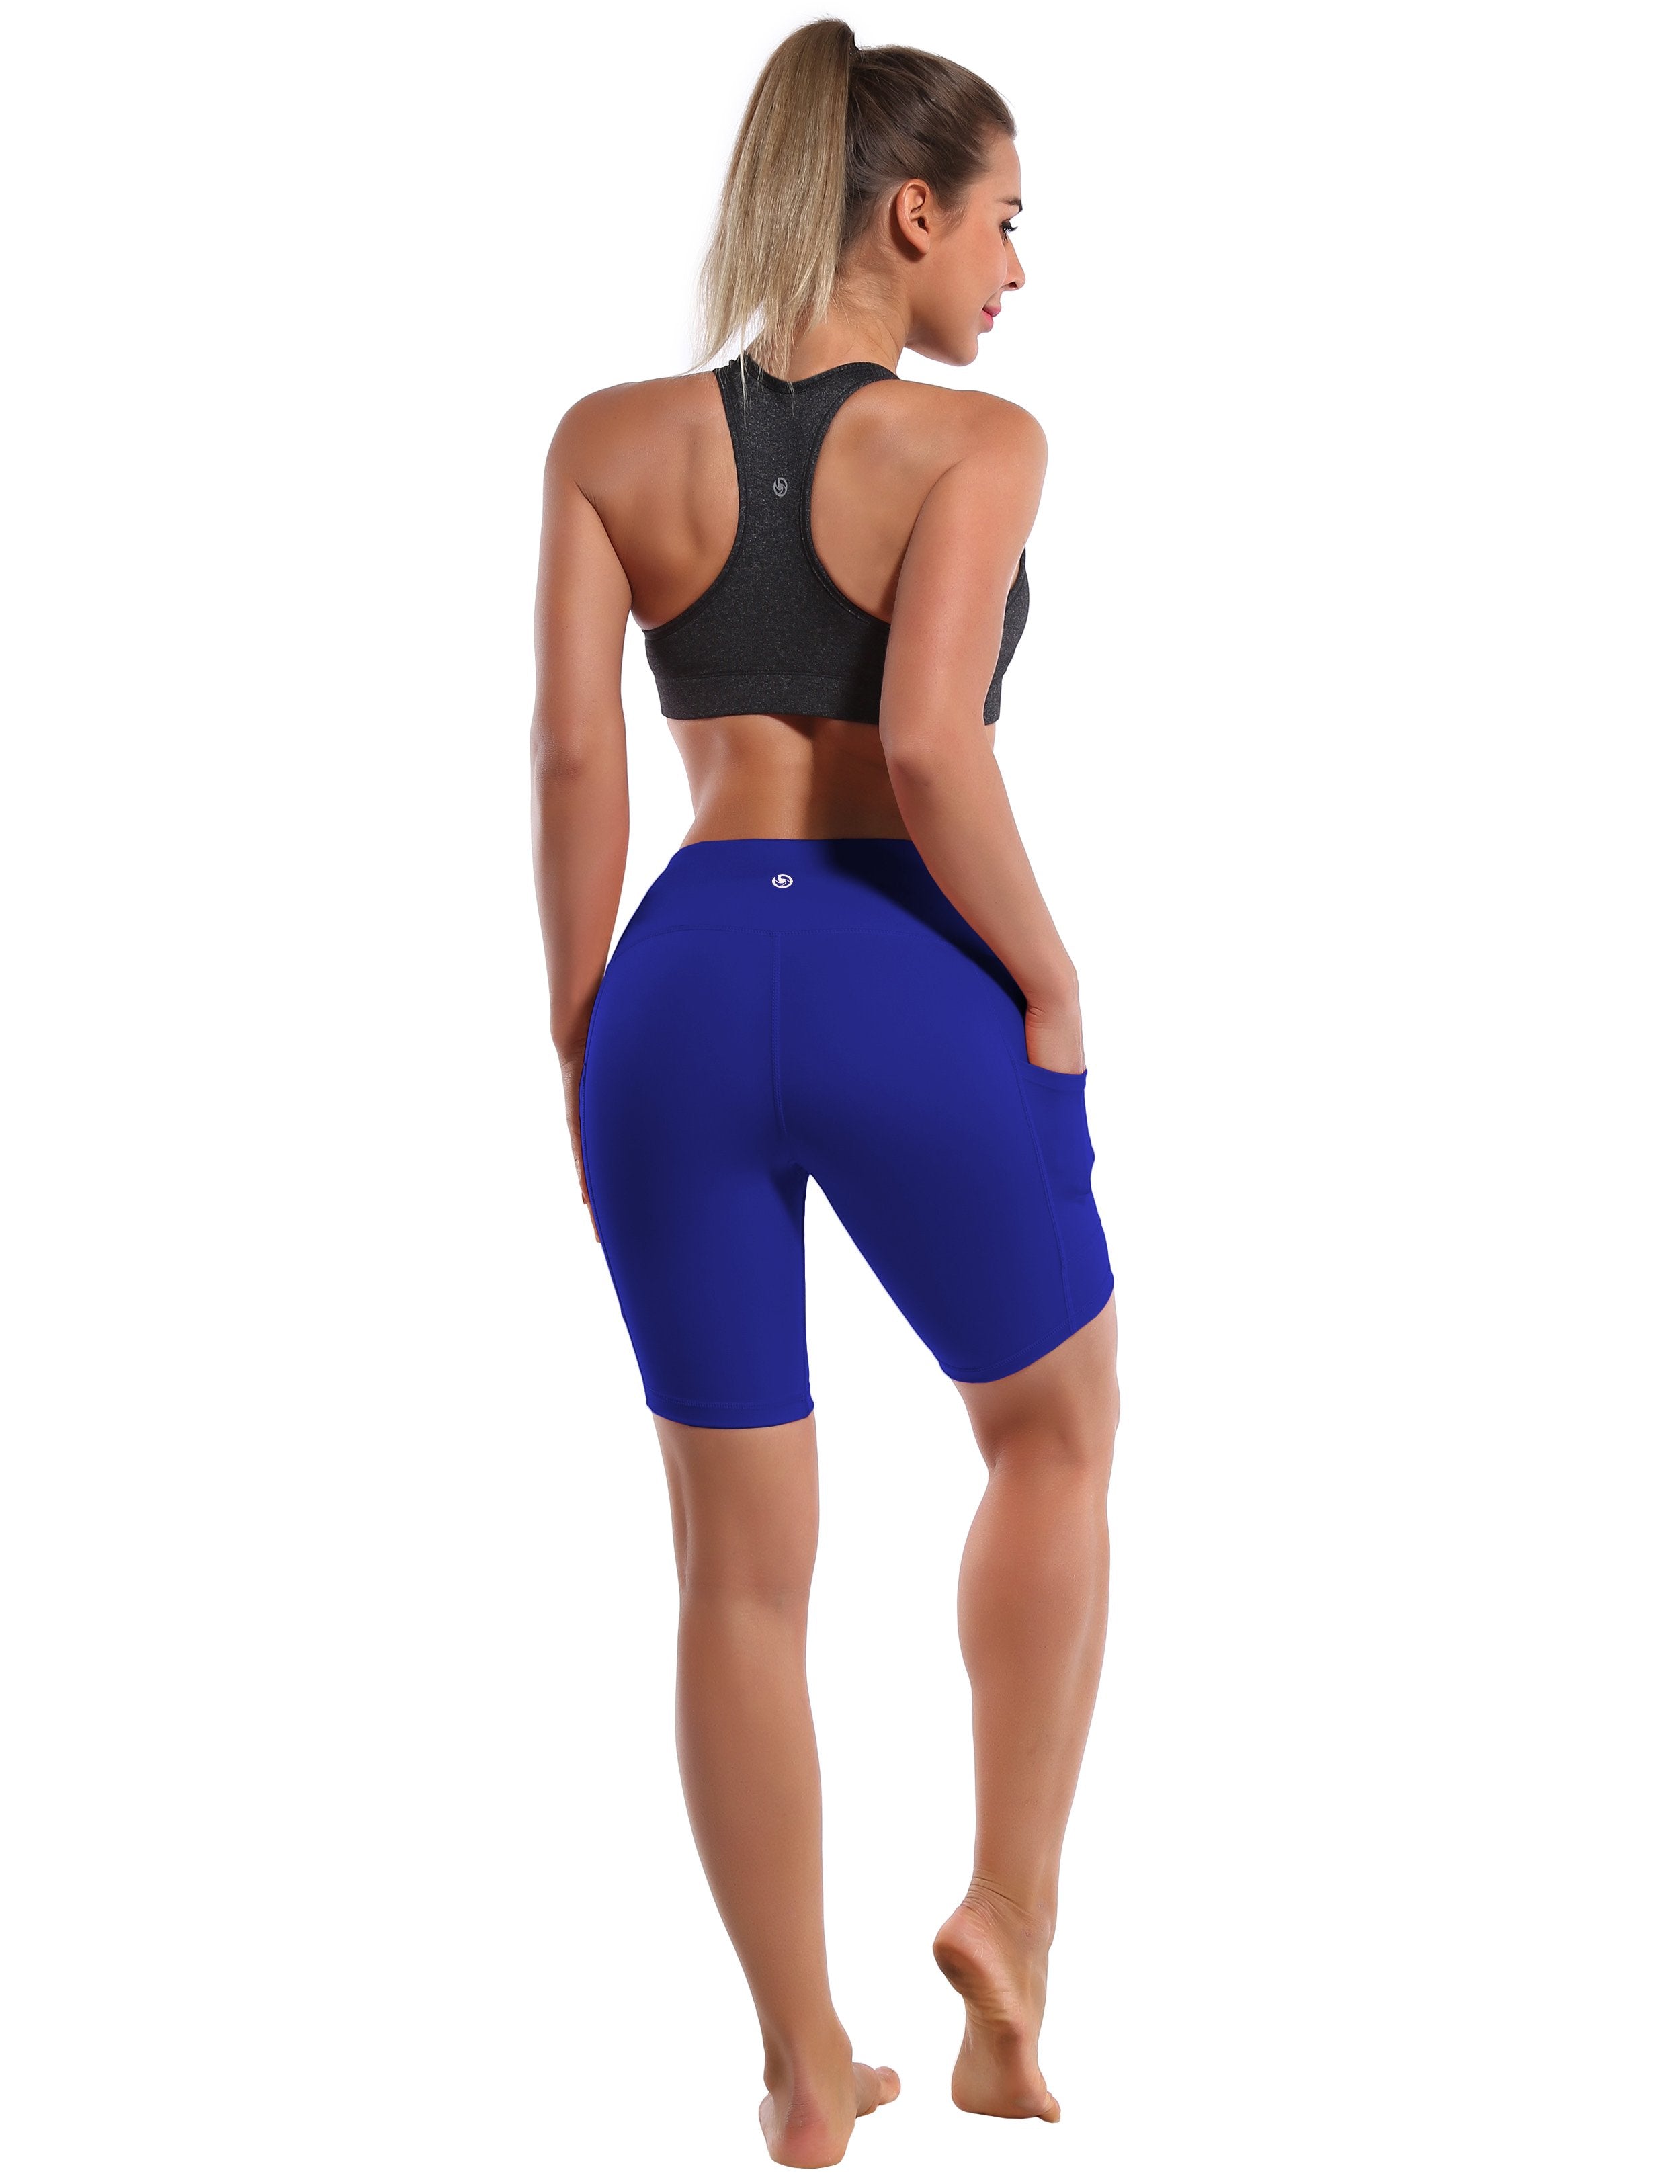 8" Side Pockets Jogging Shorts navy Sleek, soft, smooth and totally comfortable: our newest style is here. Softest-ever fabric High elasticity High density 4-way stretch Fabric doesn't attract lint easily No see-through Moisture-wicking Machine wash 75% Nylon, 25% Spandex